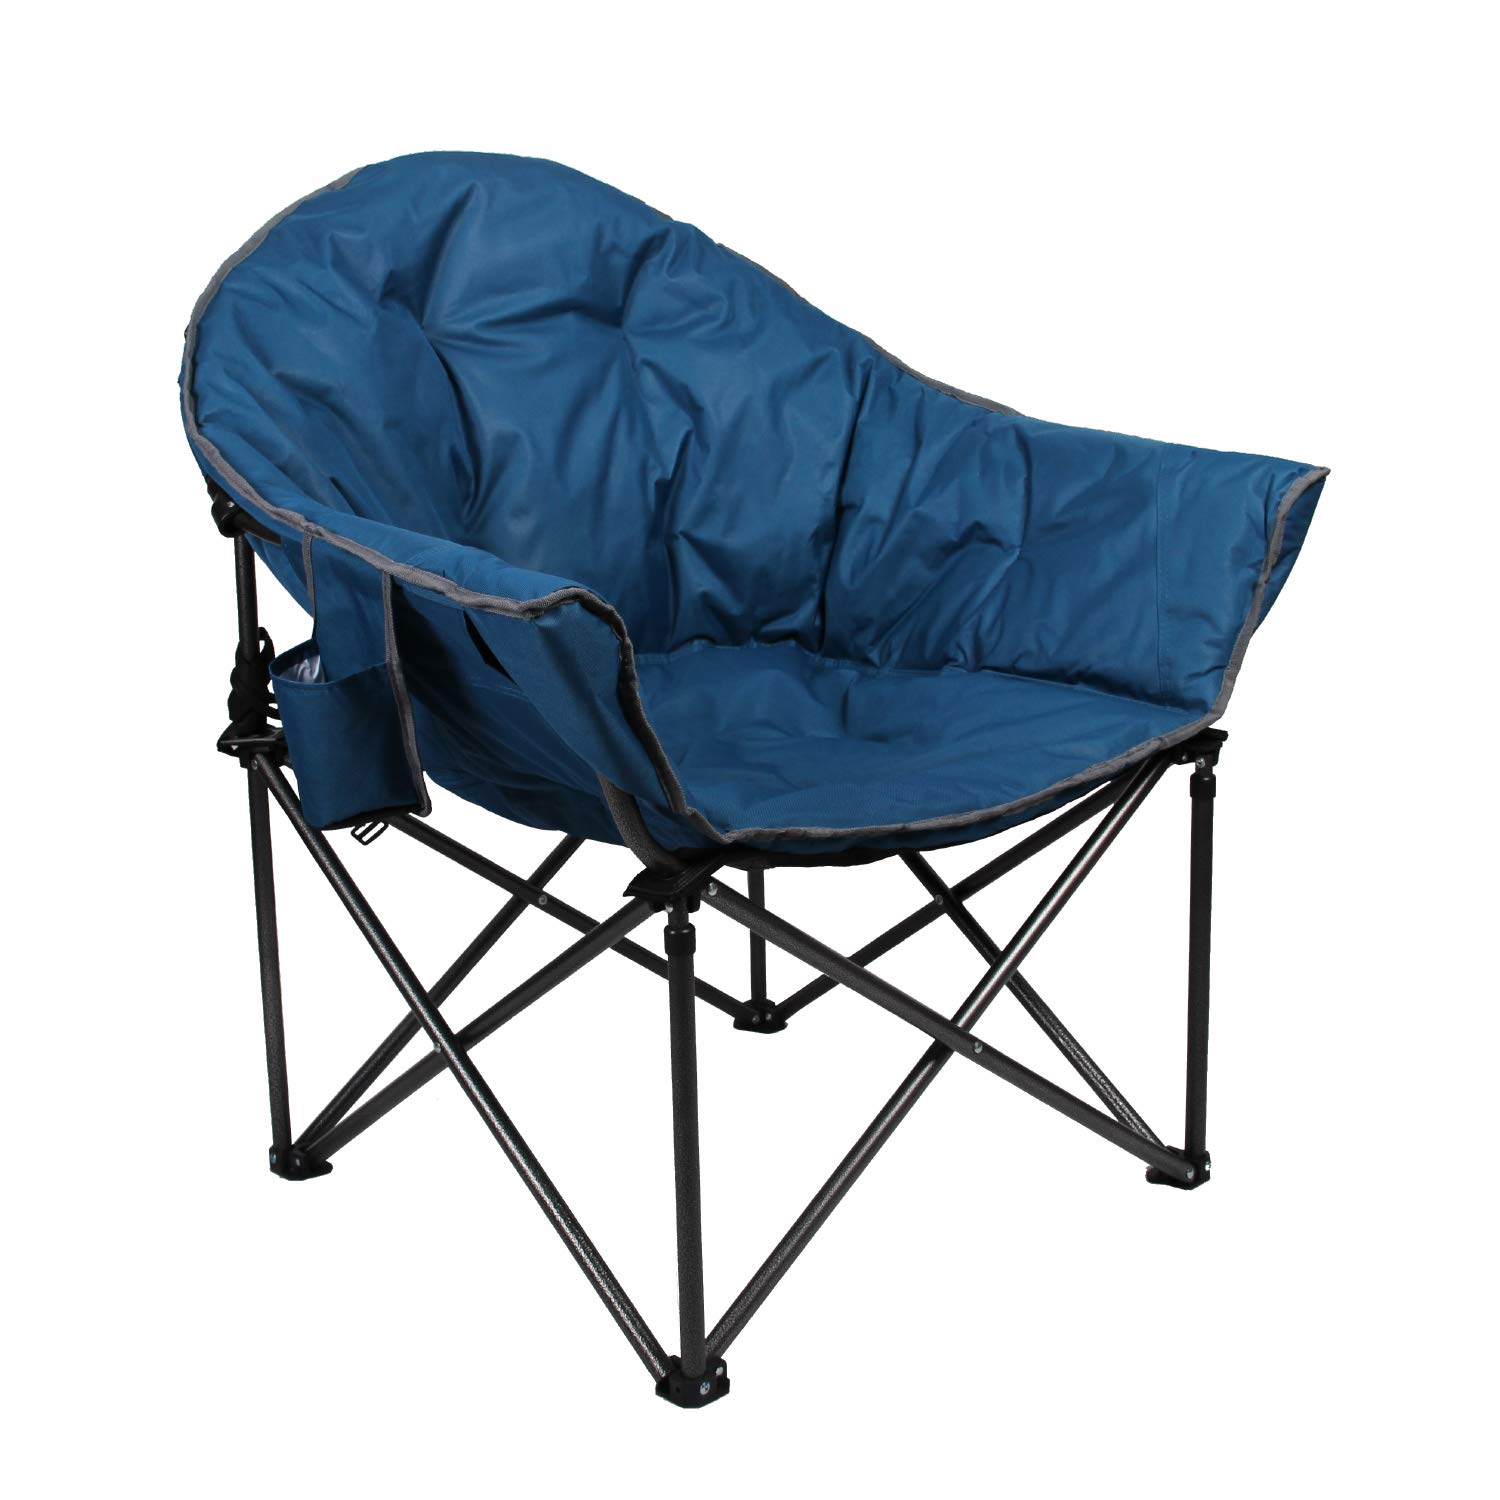 ALPHA + ALPHA CAMP Oversized Camping Chairs Padded Moon Round Chair